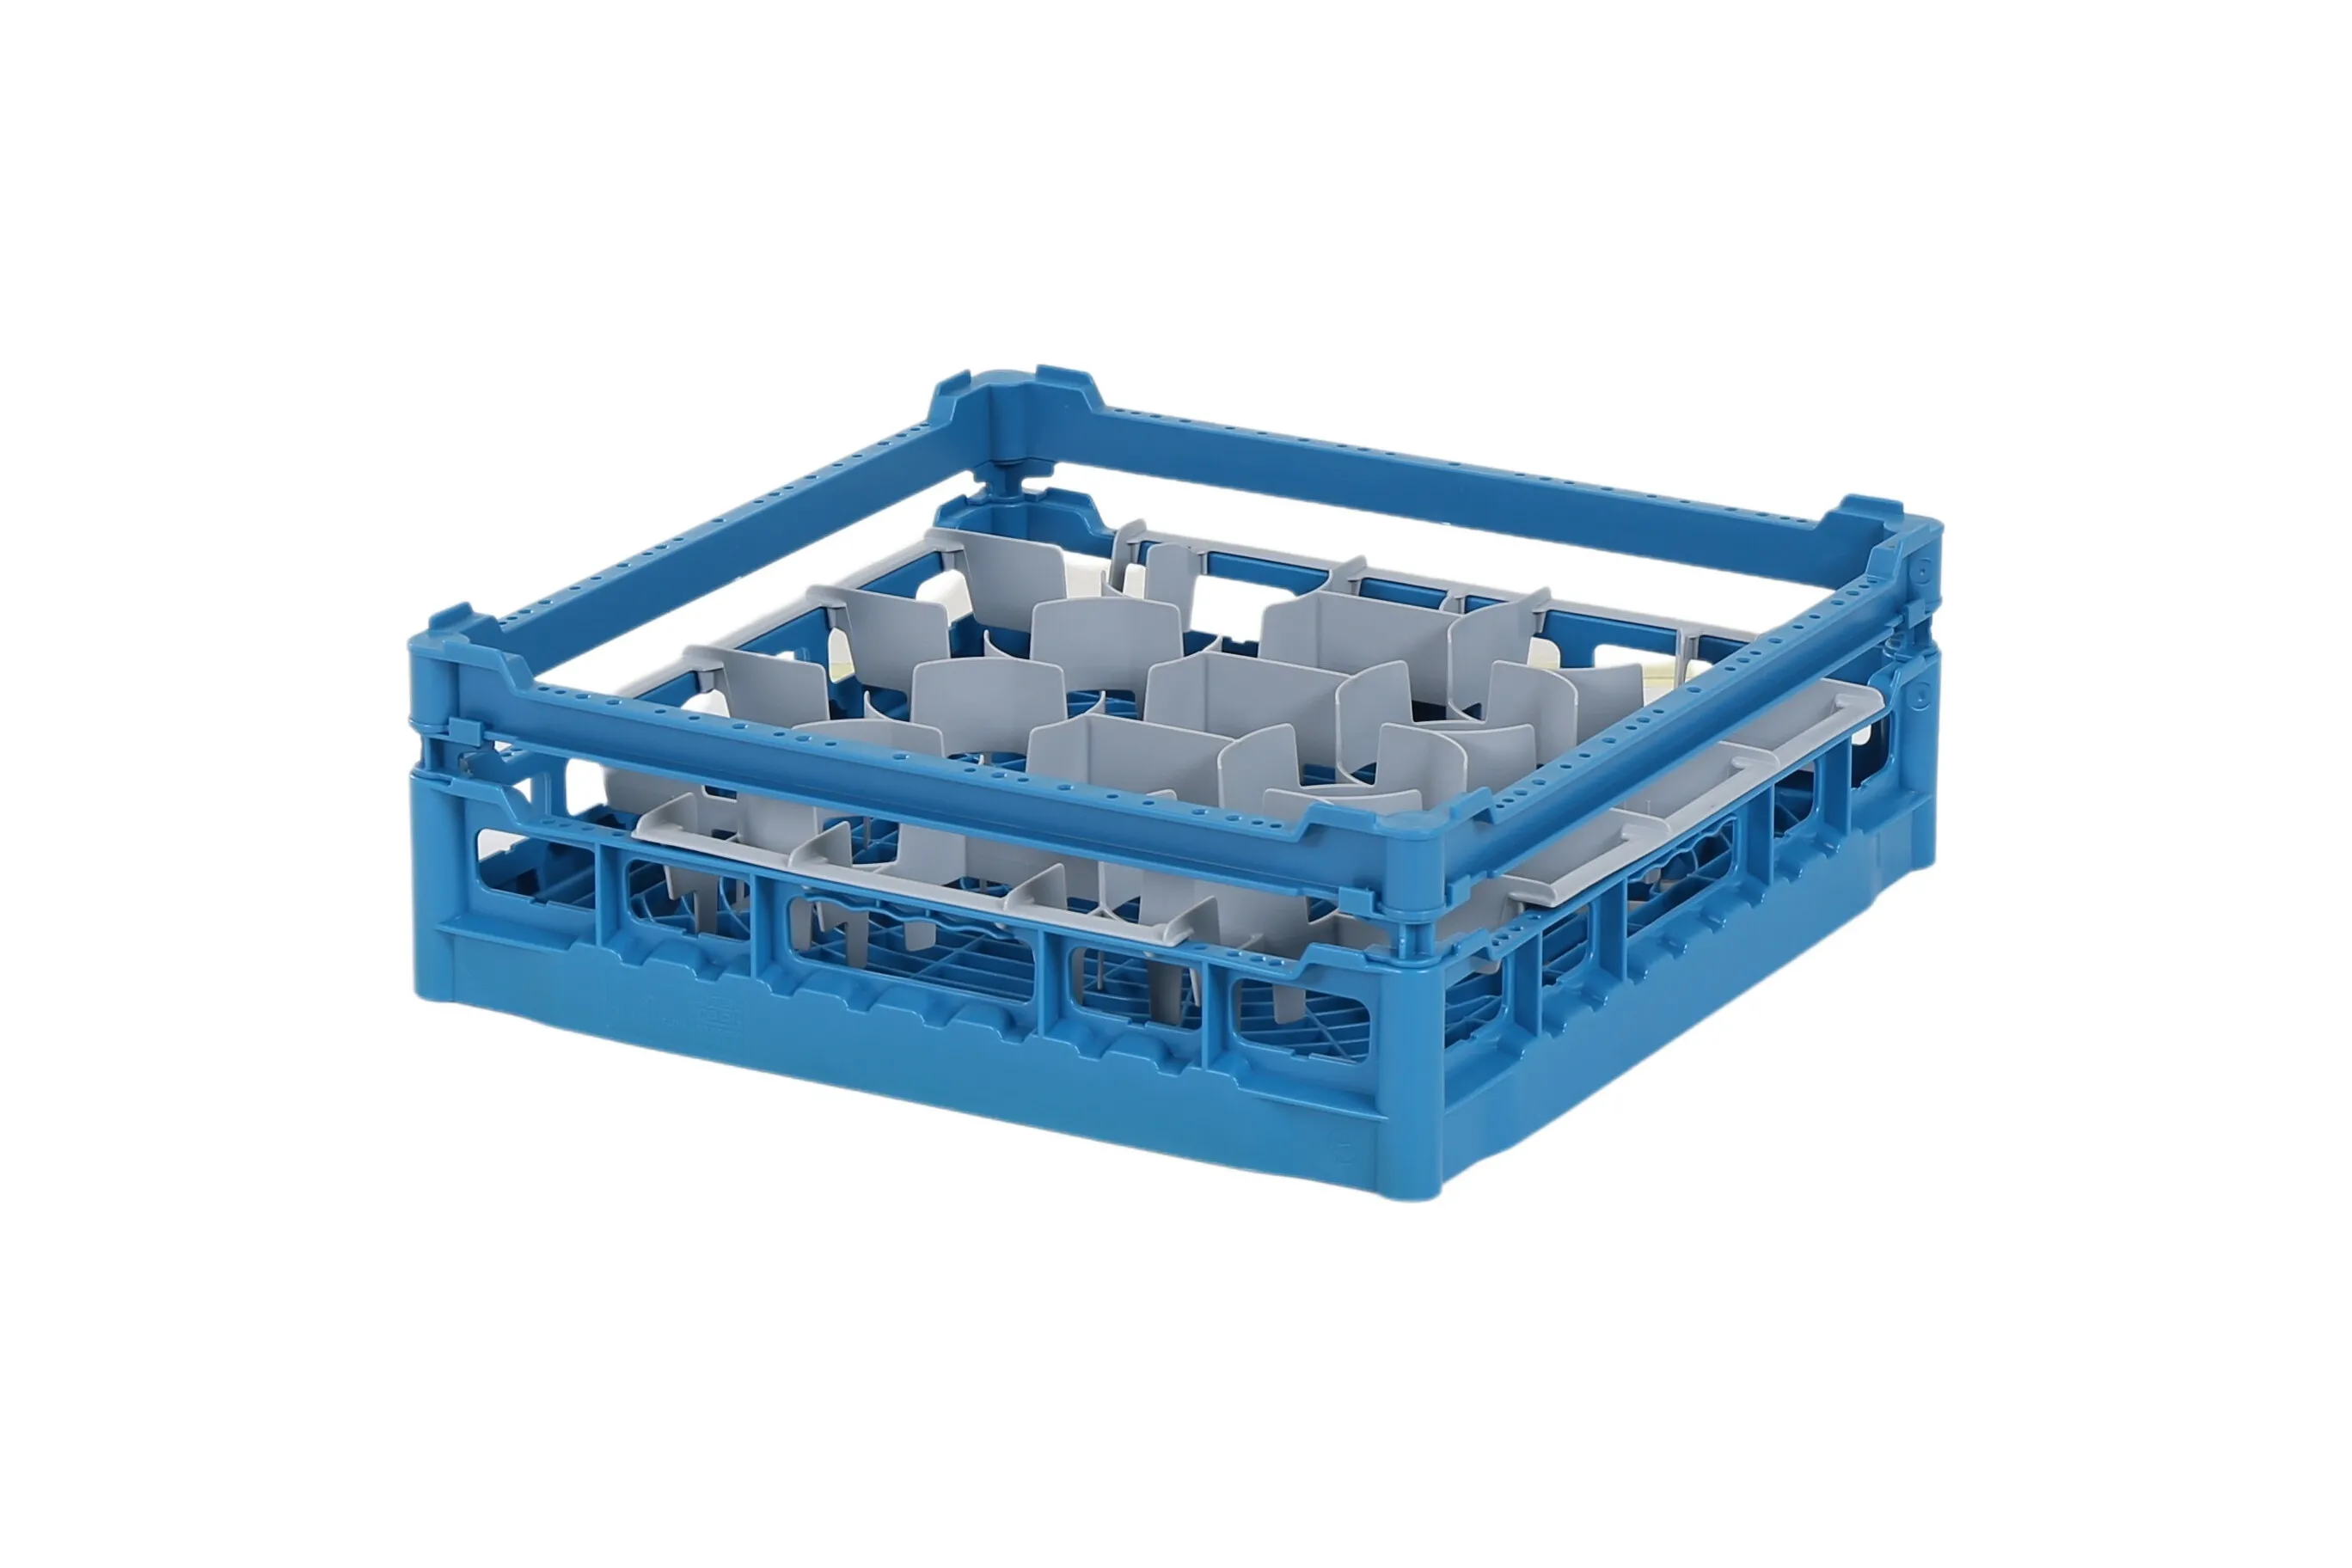 Glass basket 500x500mm blue - maximum glass height 120 mm - with gray 20-compartment division - maximum glass Ø 99mm